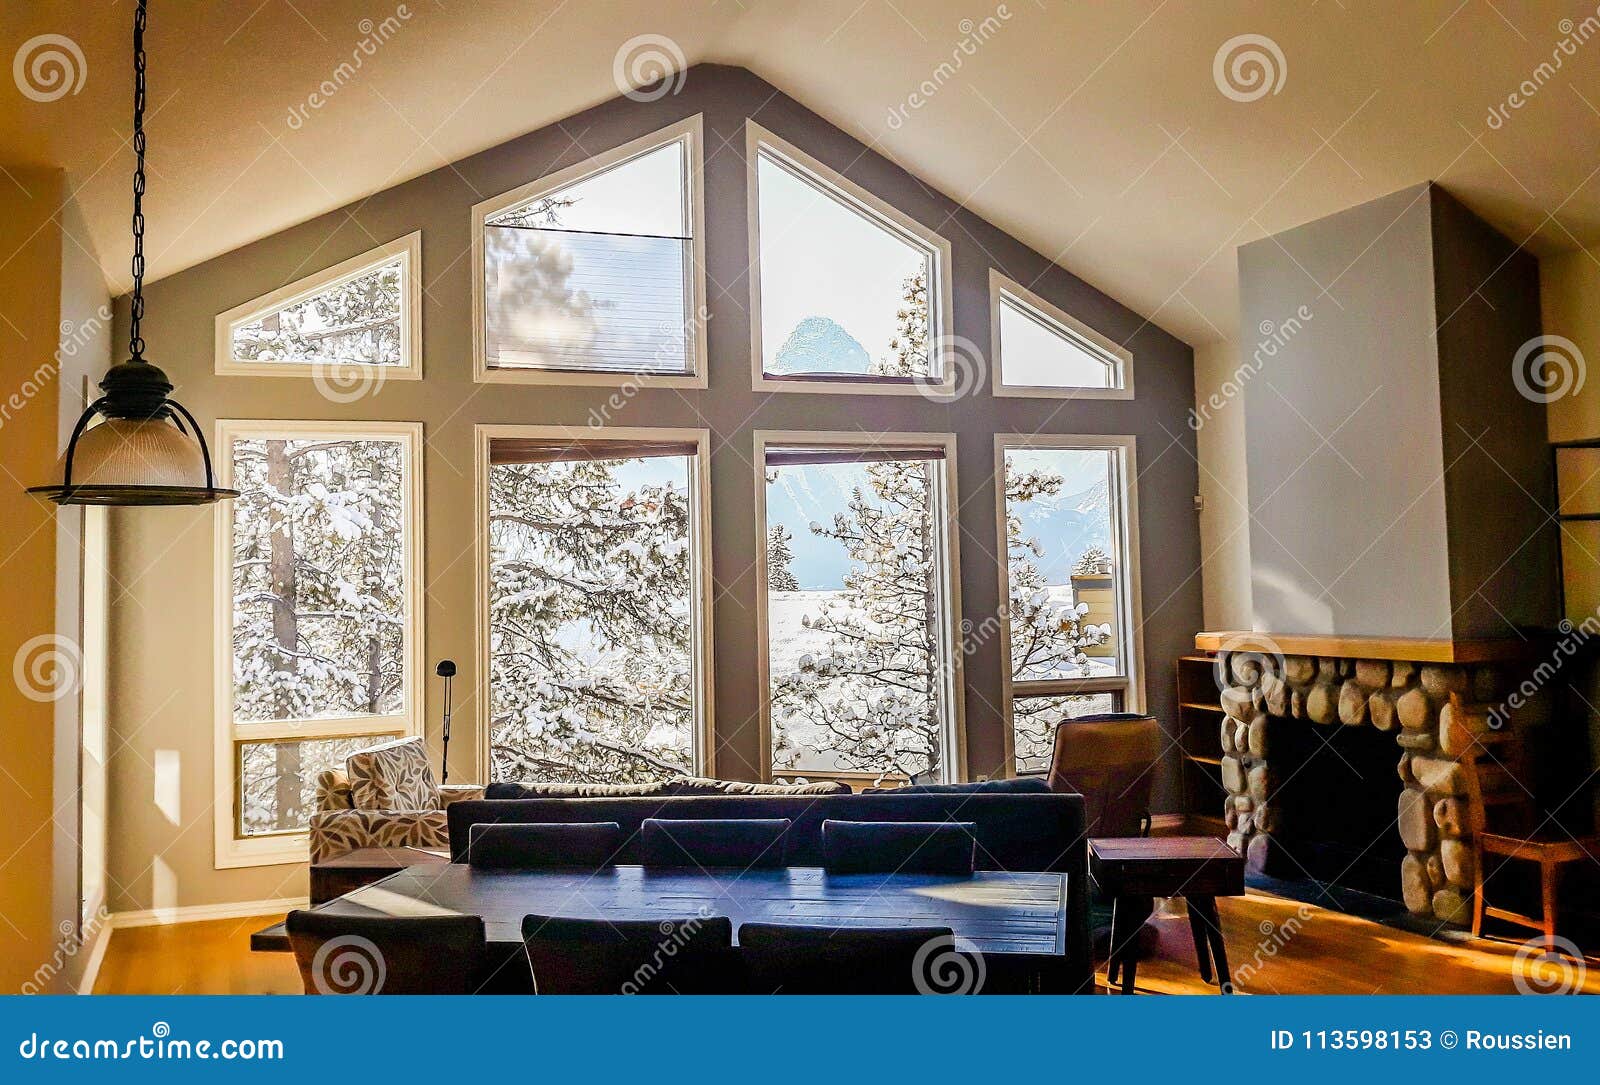 Living Room With Wide Big Windows Typical For Mountain Style In Canada Stock Image Image Of Apartment Furniture 113598153